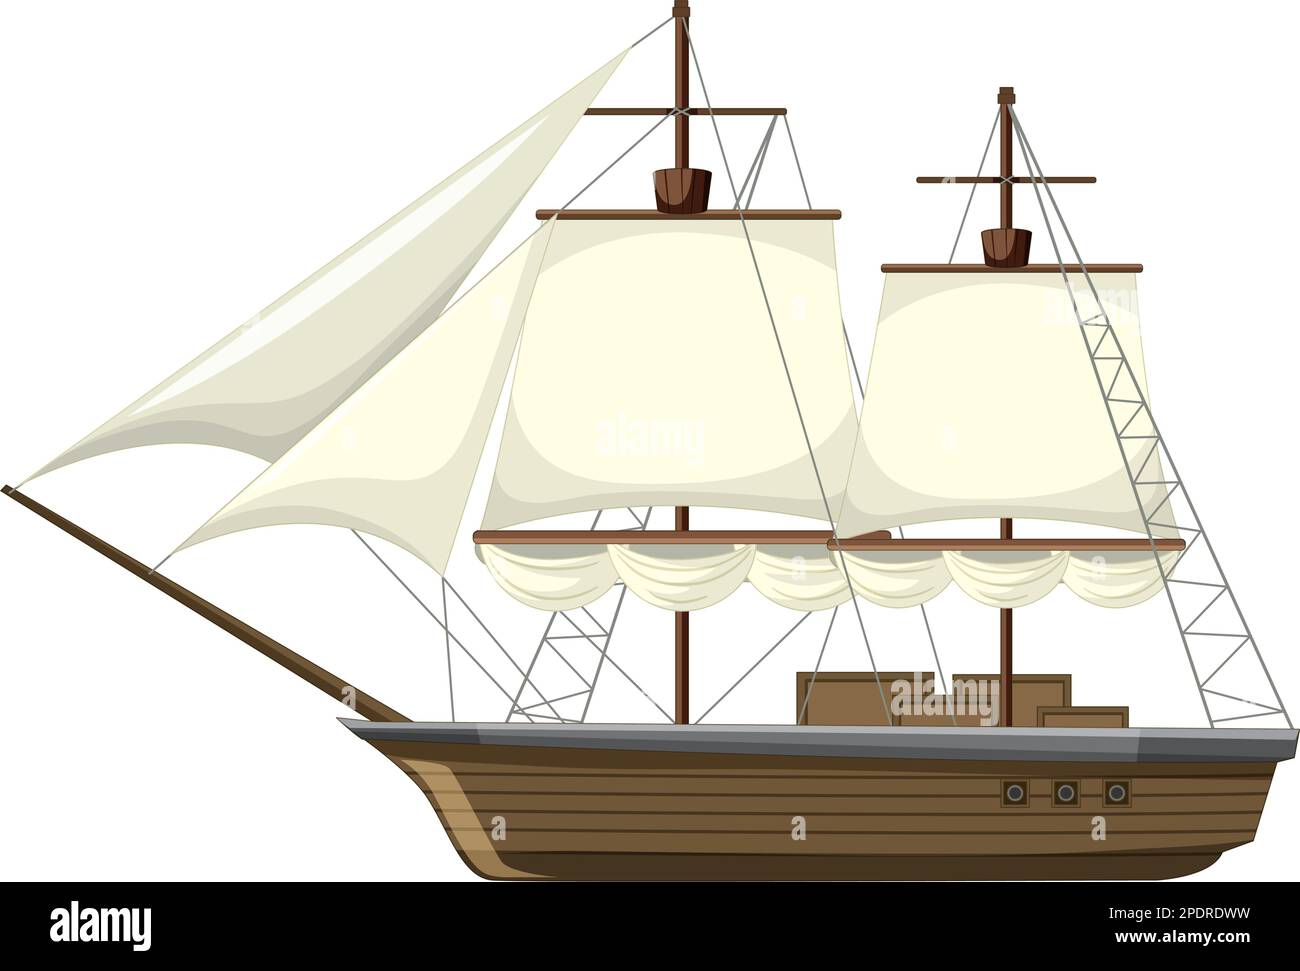 The barque on the white background illustration Stock Vector